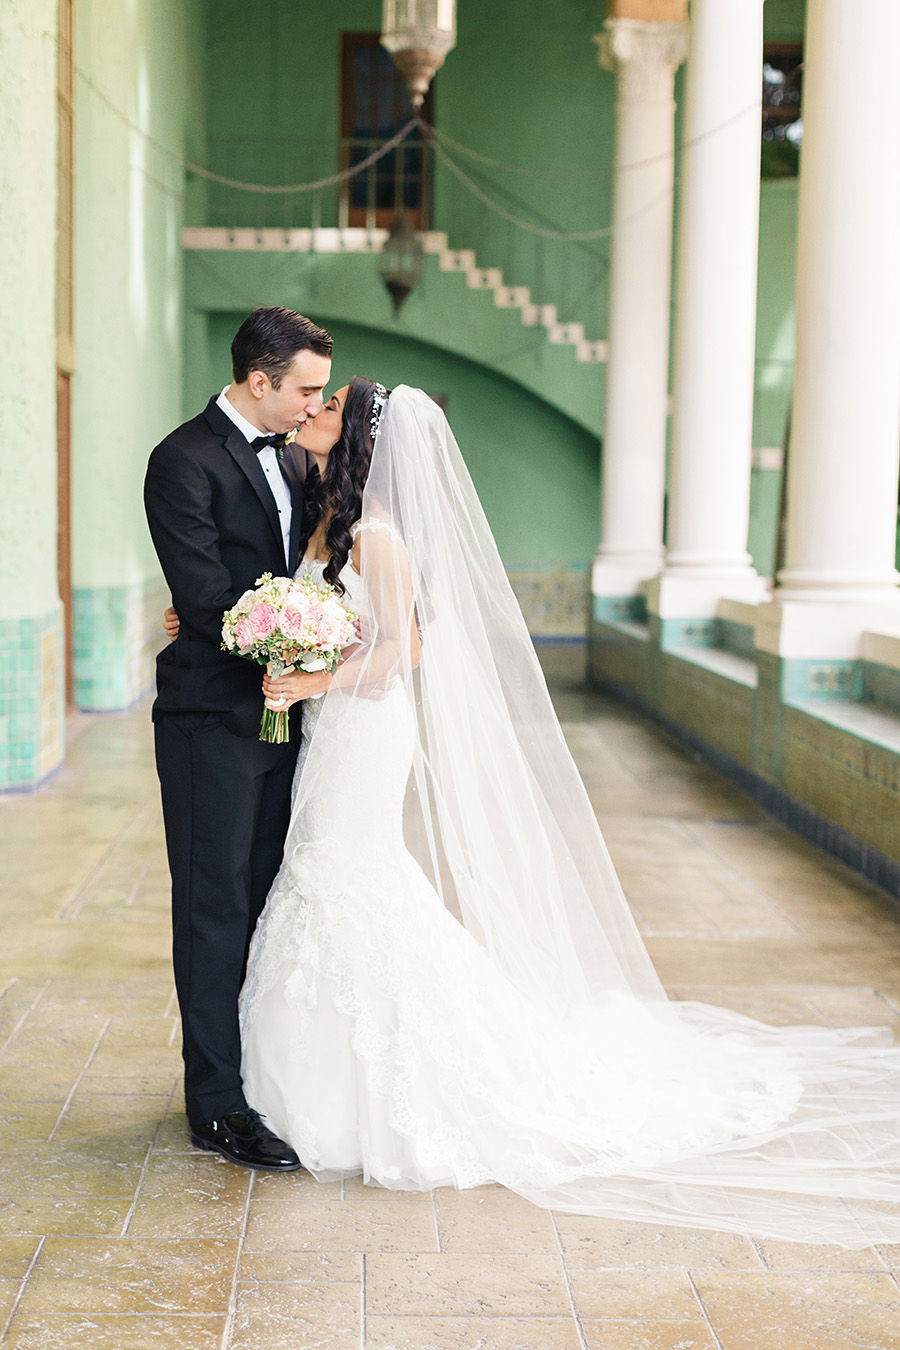 This Hollywood Glam Wedding in Houston is Full of Iconic Glitz